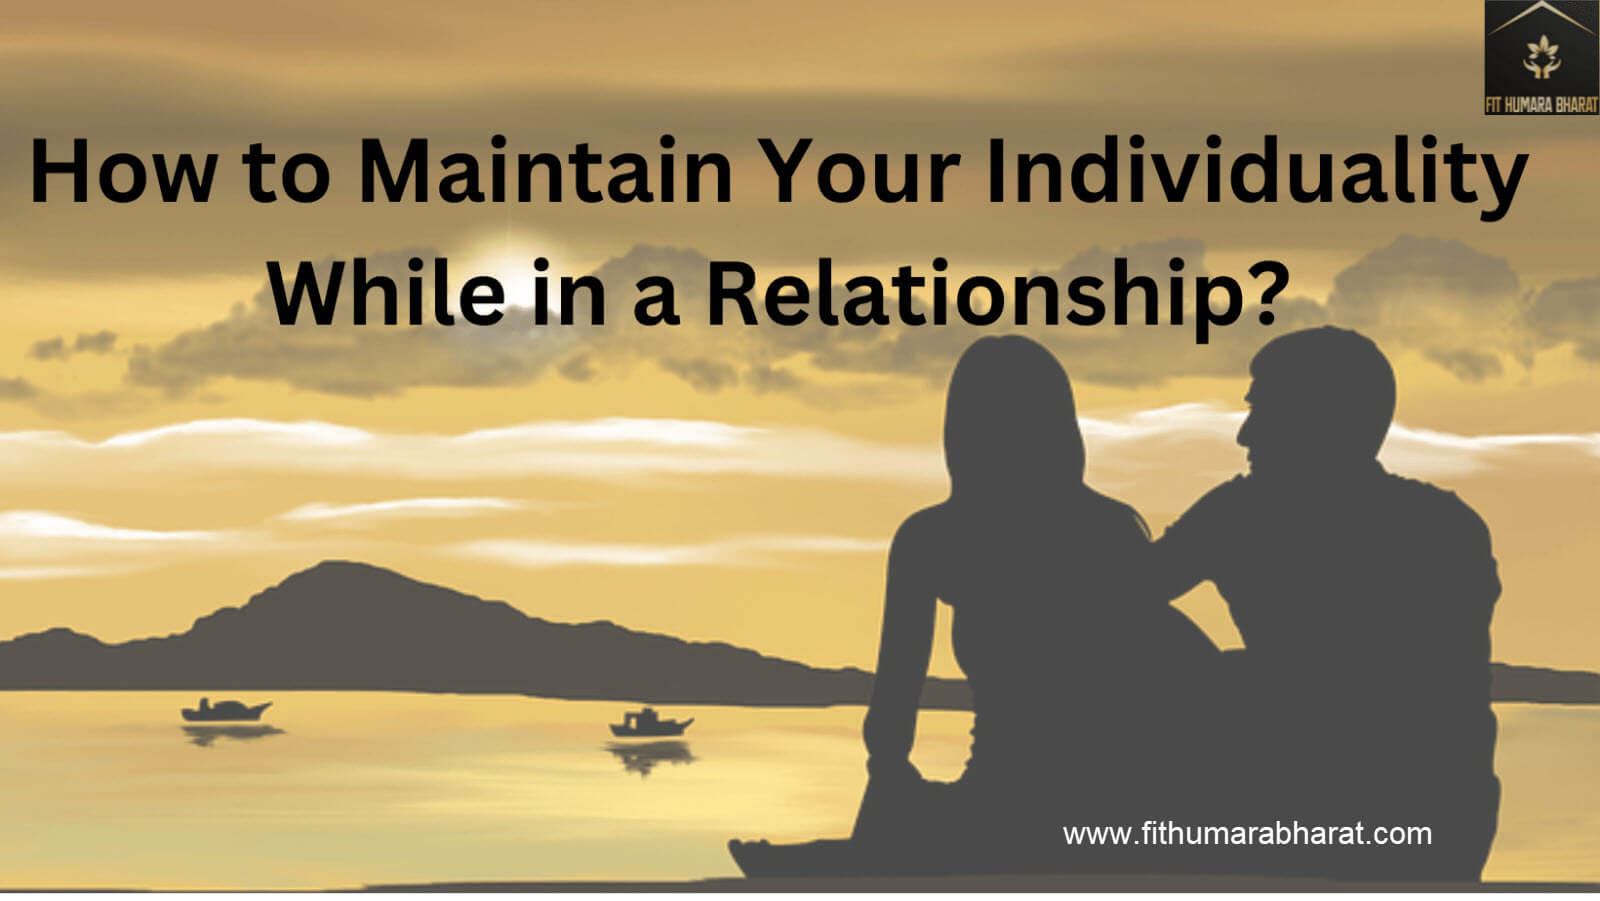 How to Maintain Your Individuality While in a Relationship